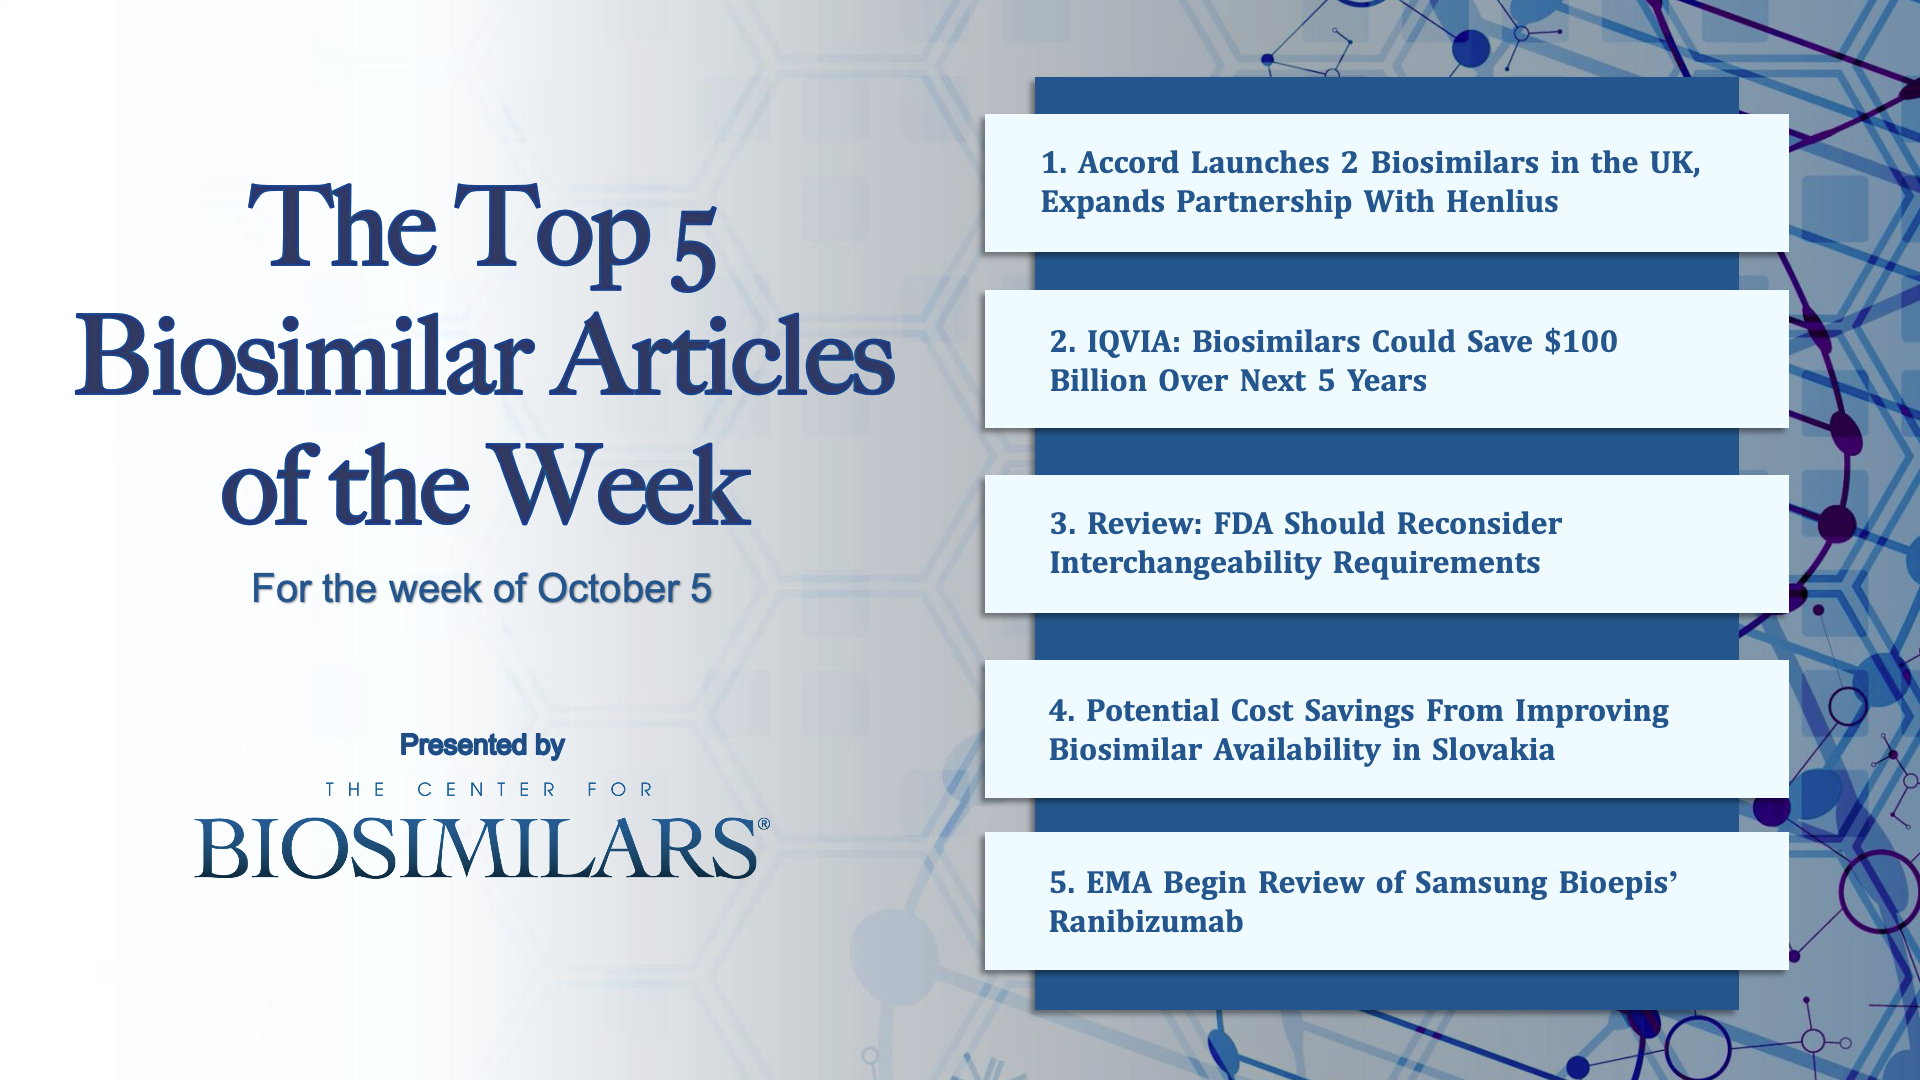 Here are the top 5 biosimilar articles for the week of October 5, 2020.